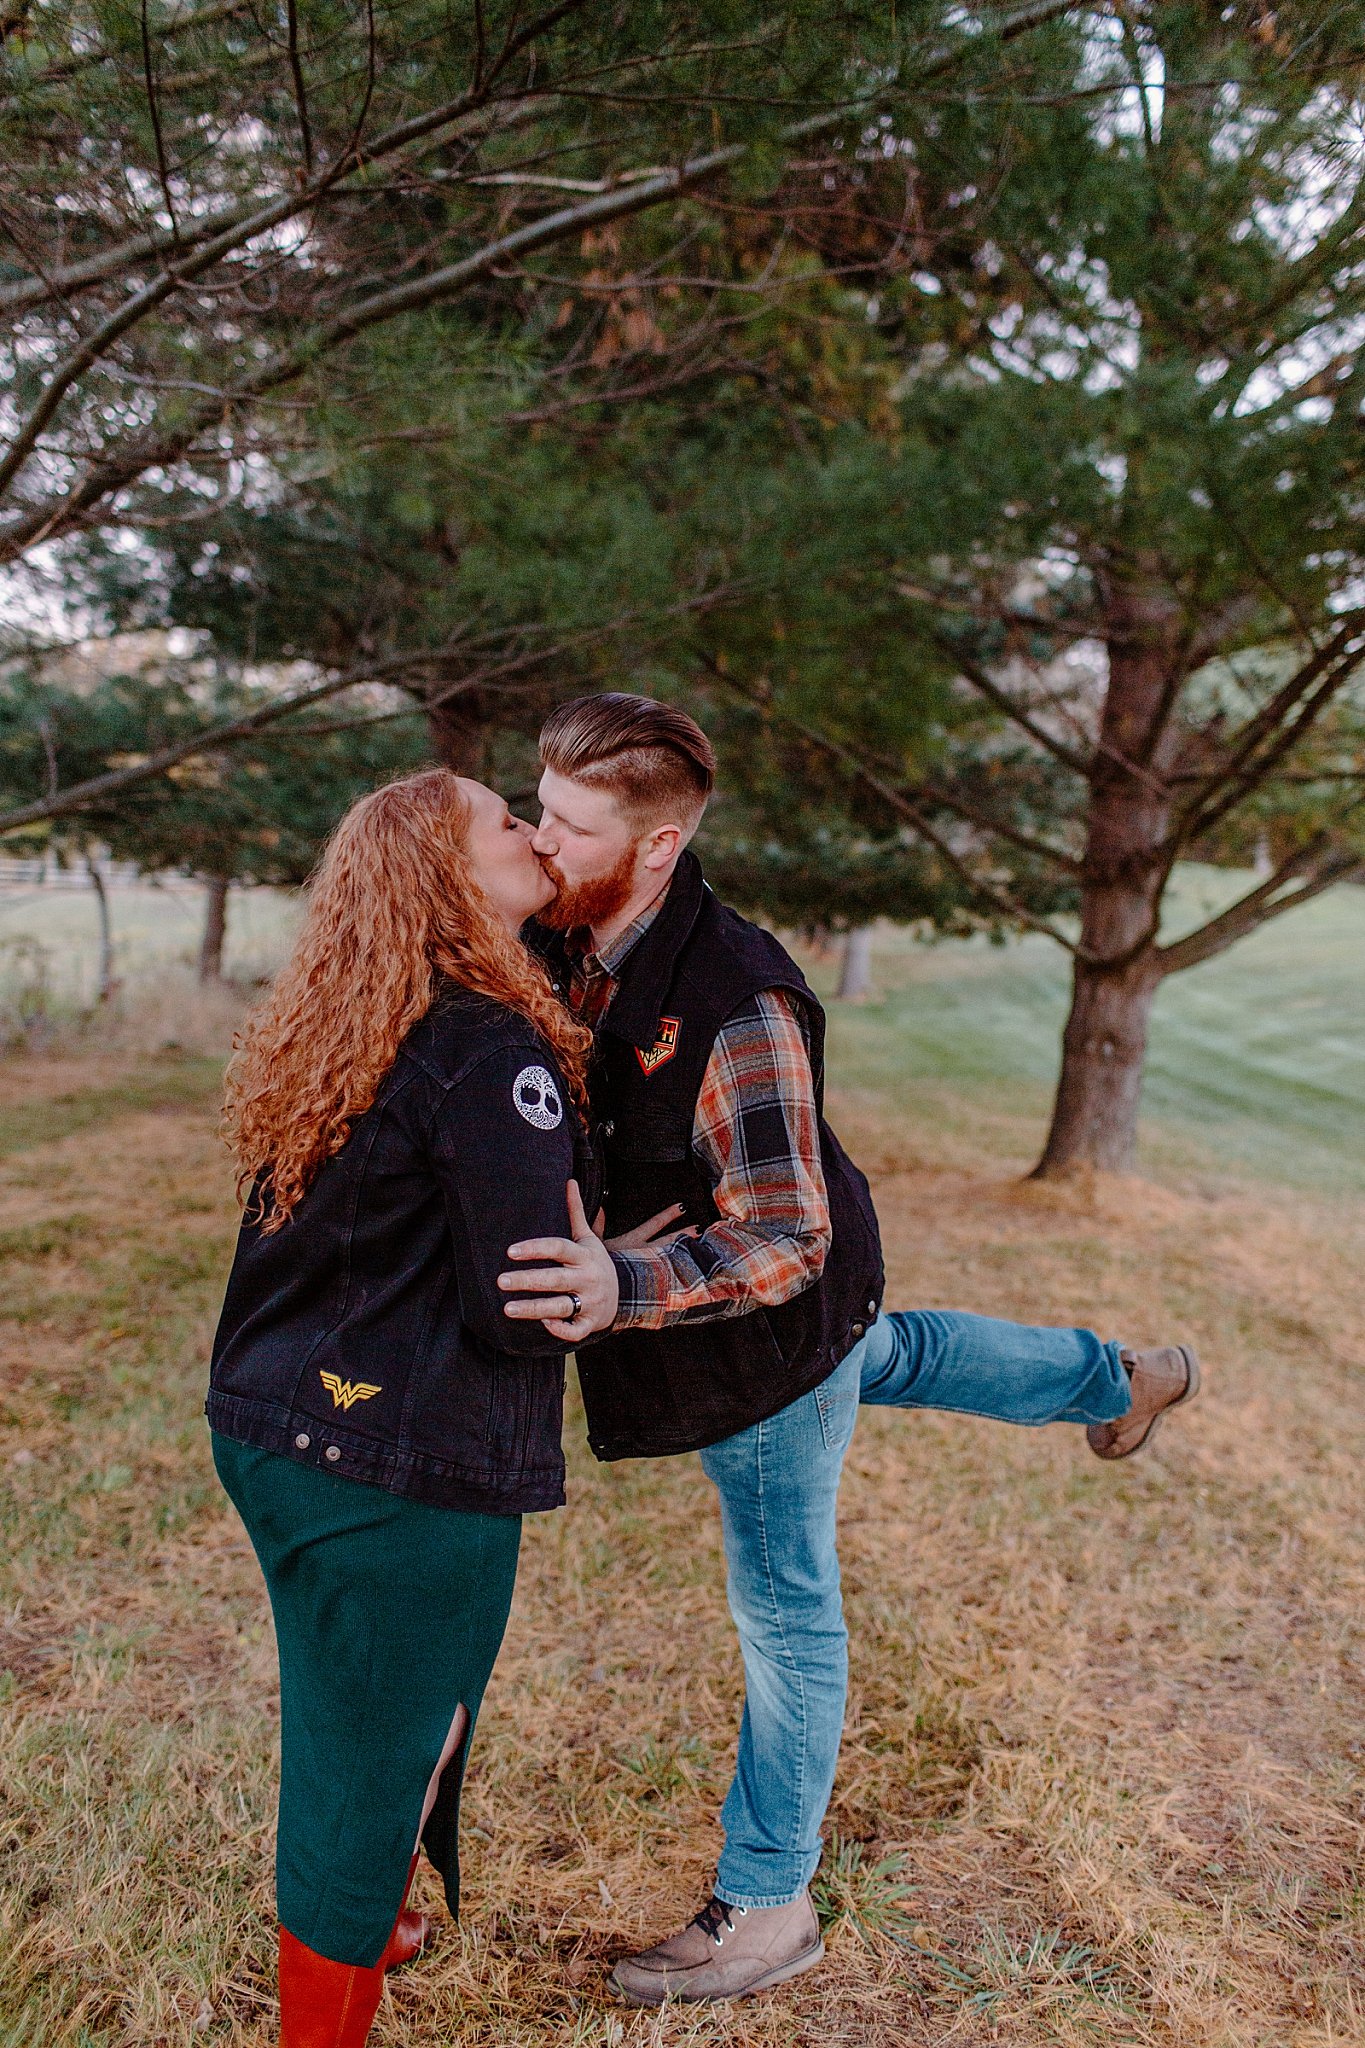  Man kisses woman with his leg in the air for Halloween engagement session 